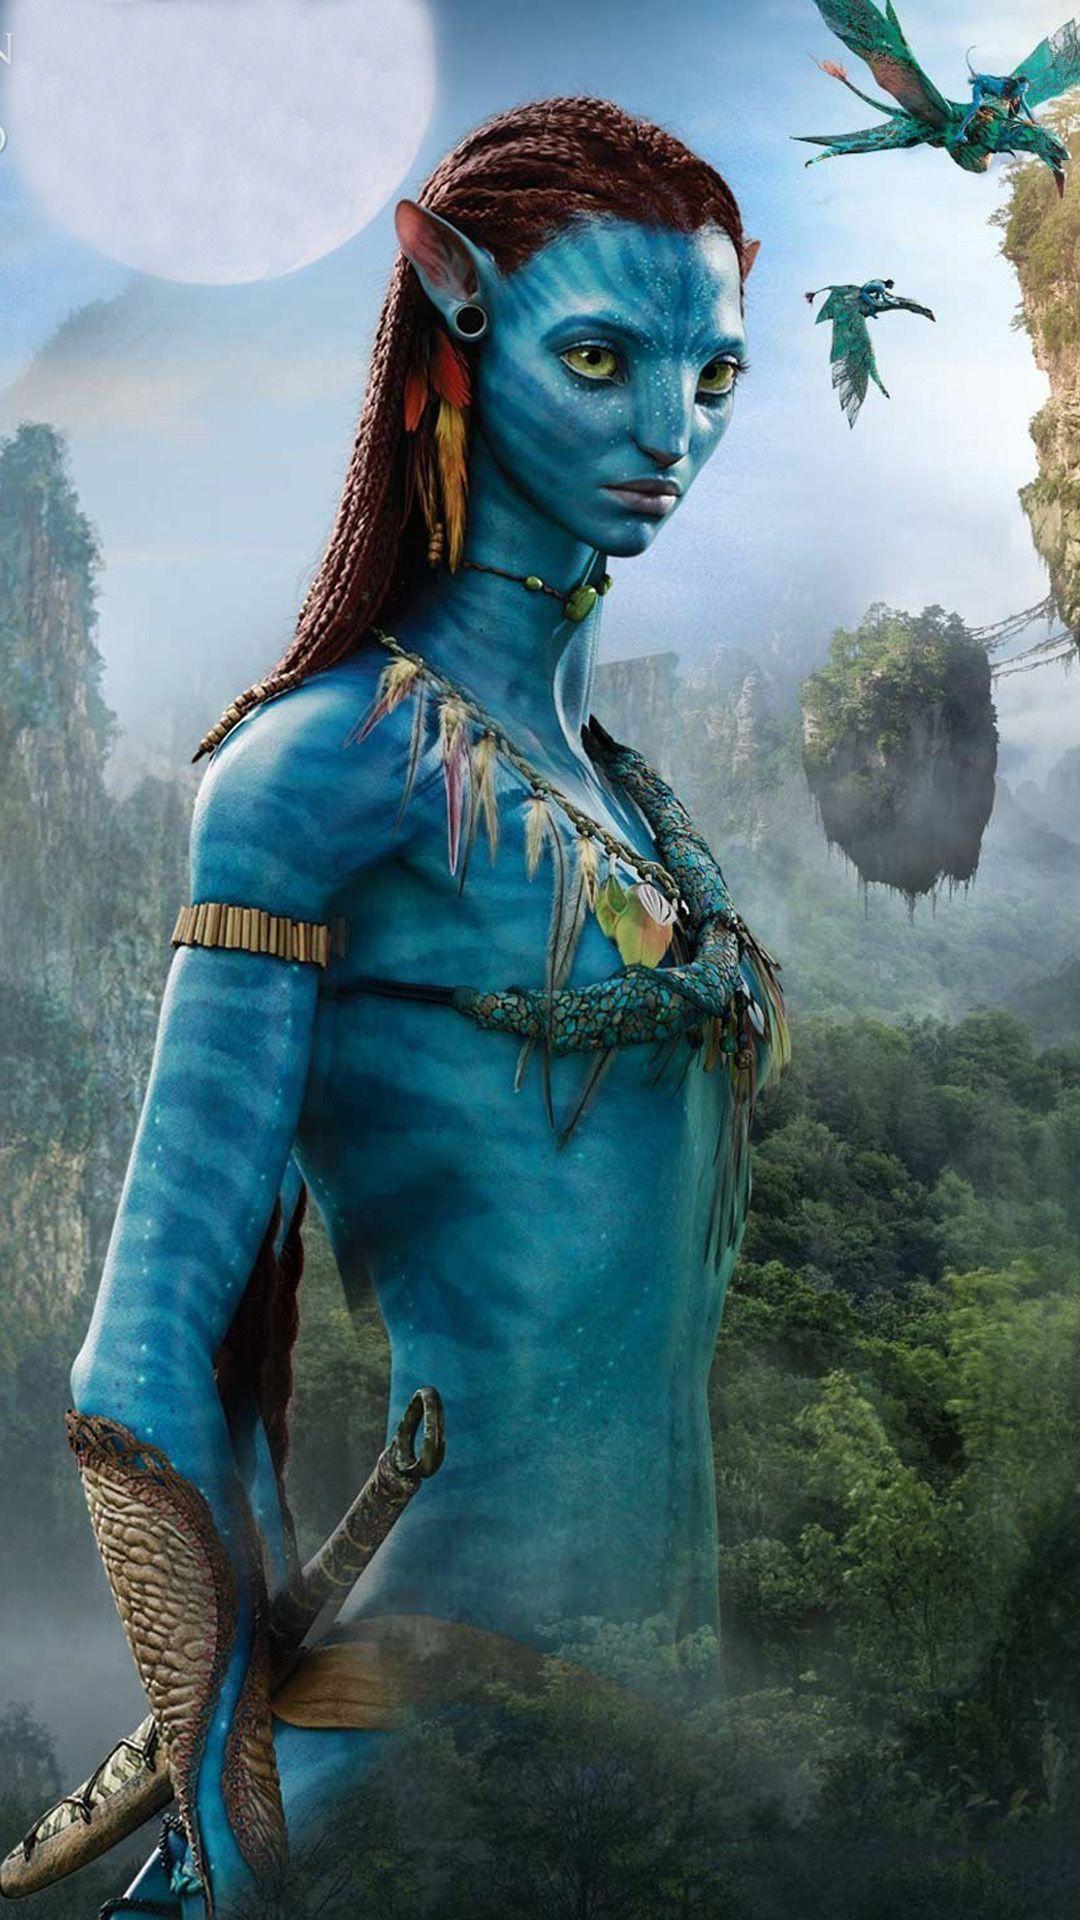 Finally, the film 'Avatar 2' has finished shooting. This is known